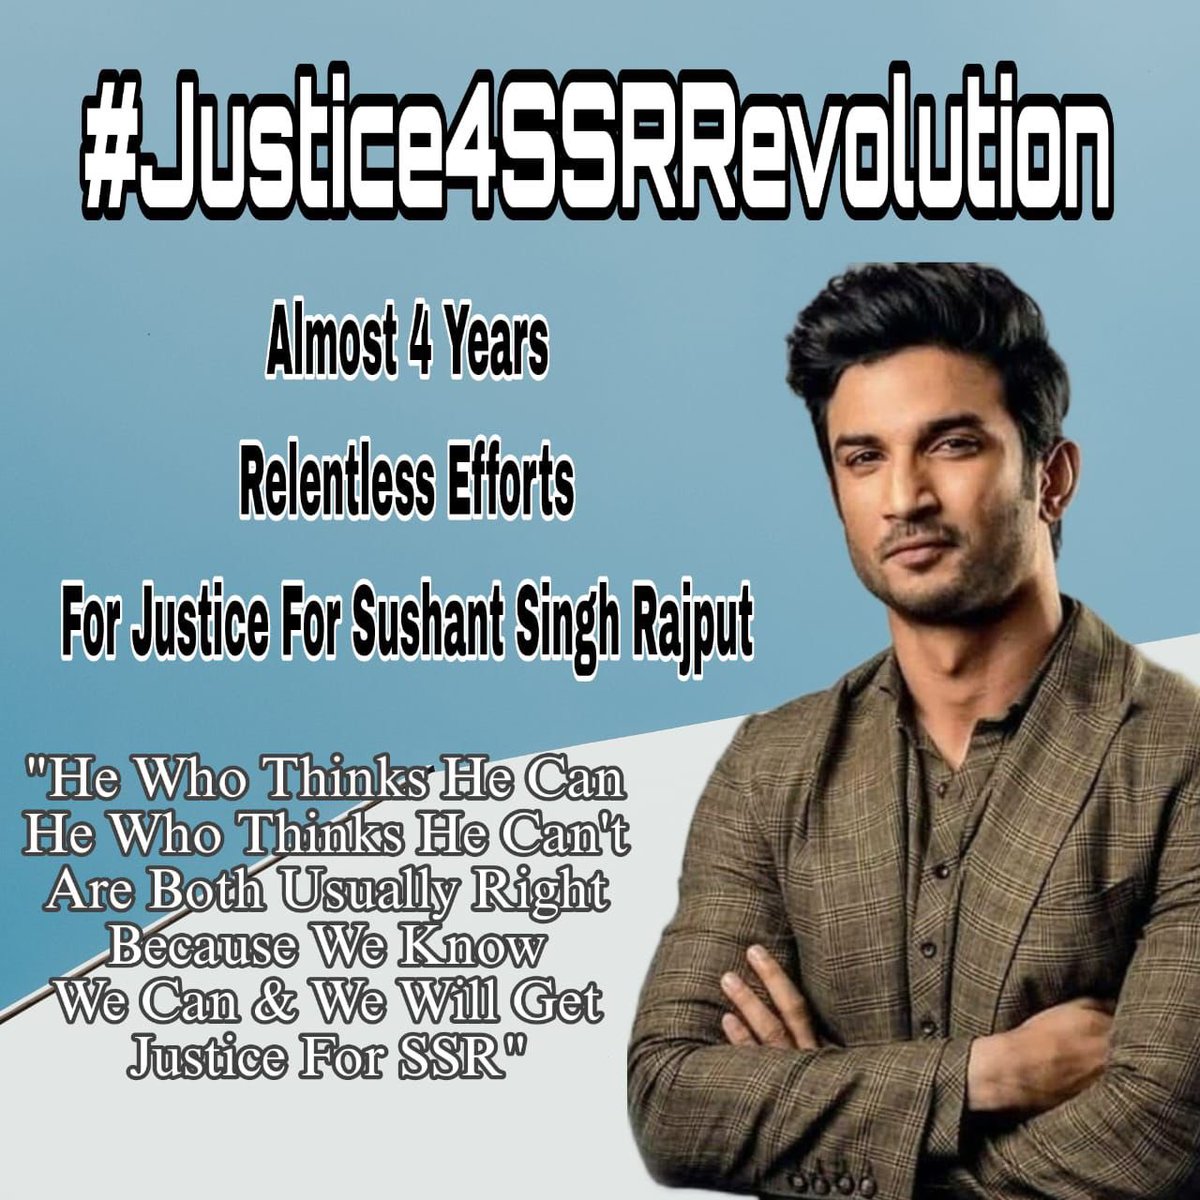 Keep the flame alive! Let's persist in our quest for justice for Sushant Singh Rajput with positivity. Let's maintain faith and urge agencies to reveal the truth. #JusticeForSSRRevolution